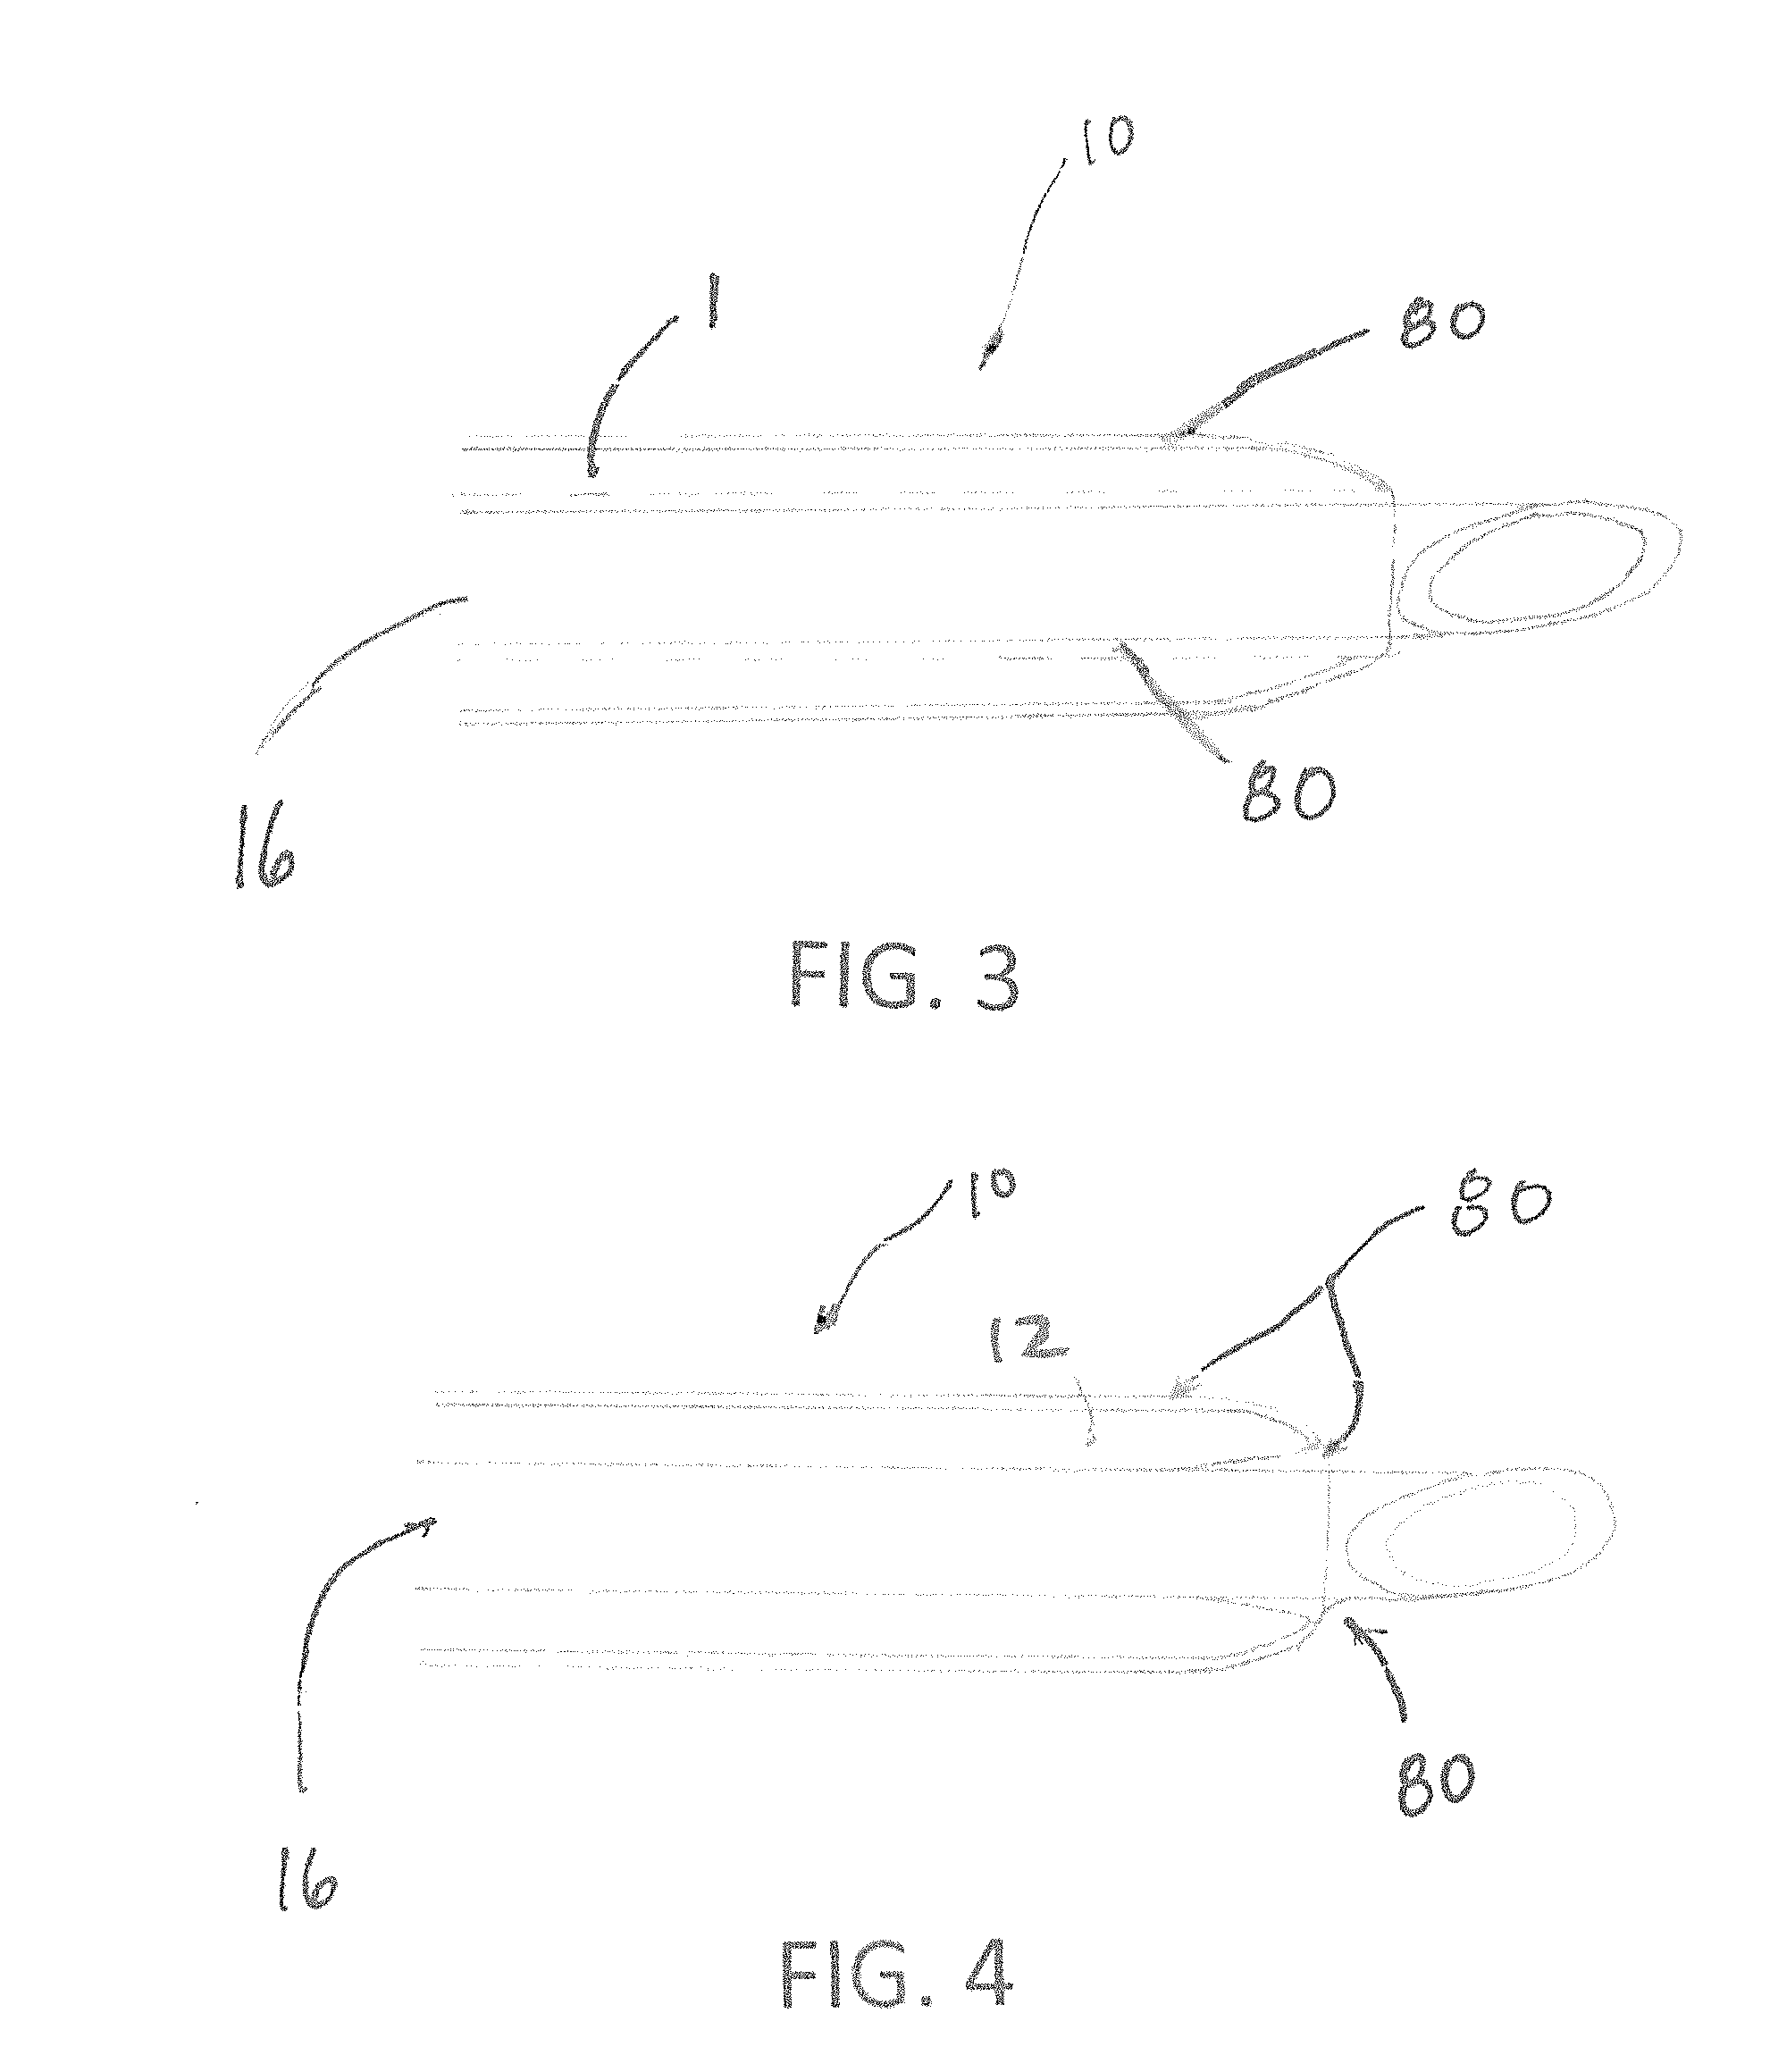 Coated medical apparatus and methods